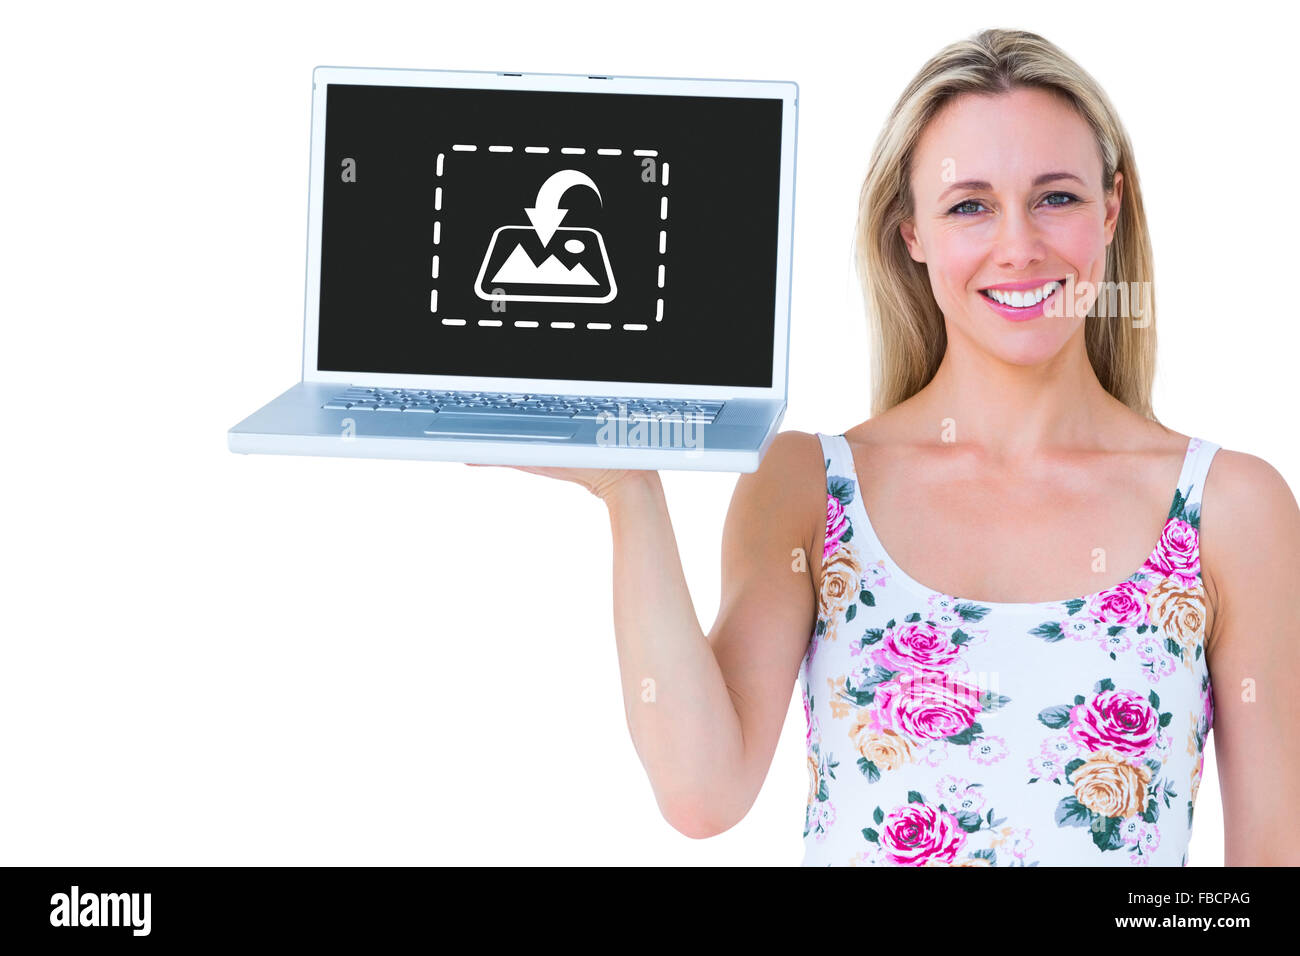 Composite image of smiling blonde holding laptop and posing Stock Photo